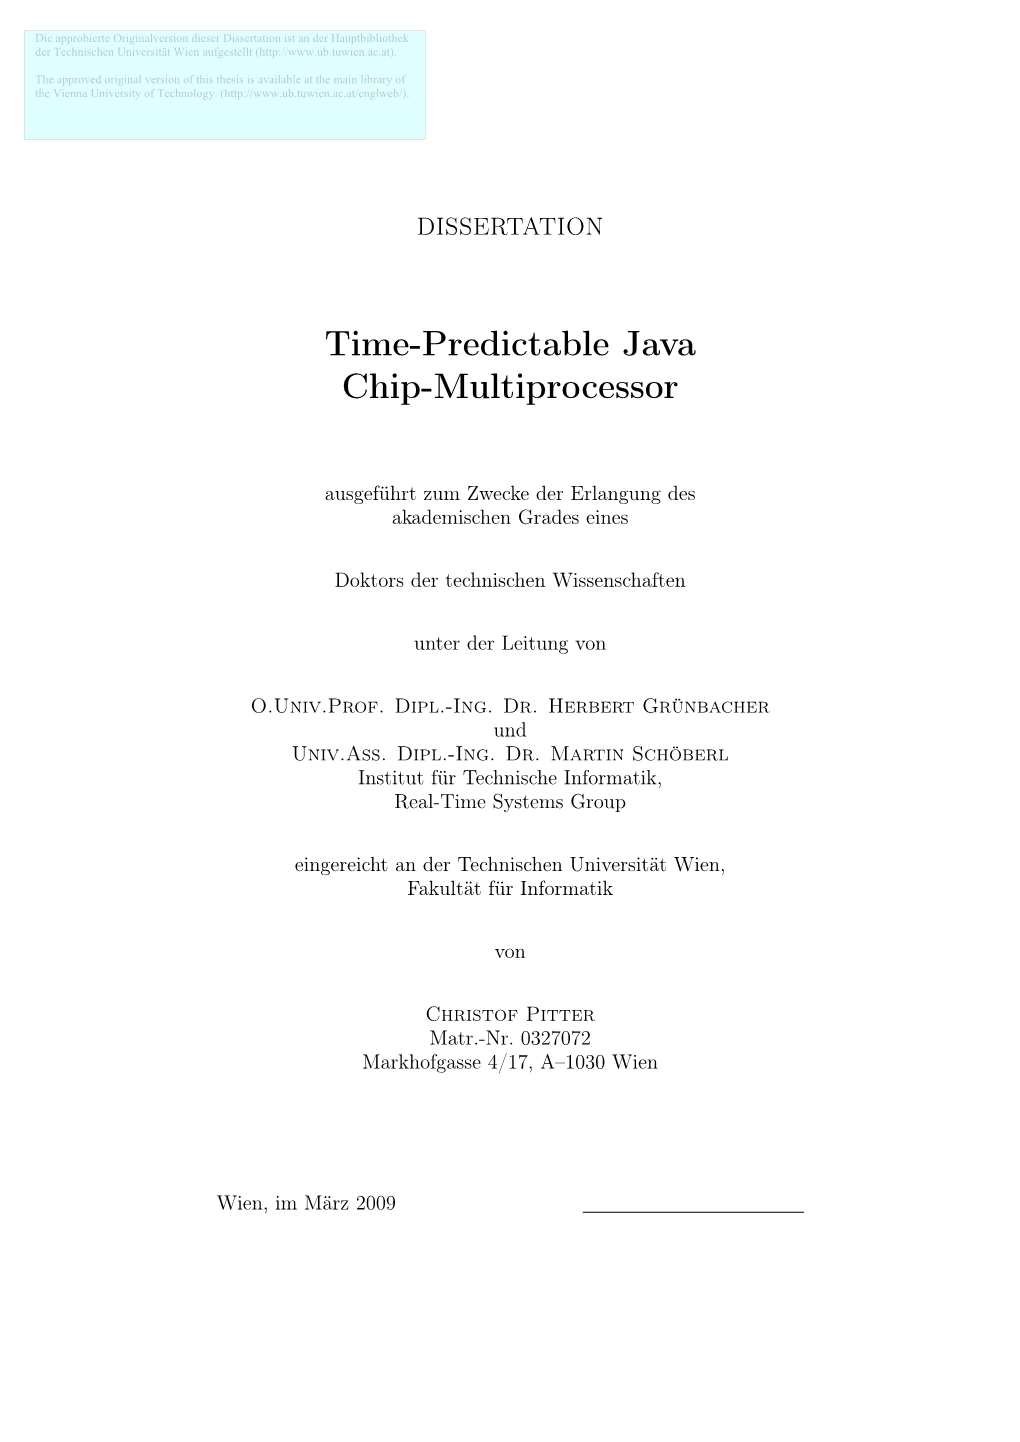 Time-Predictable Java Chip-Multiprocessor